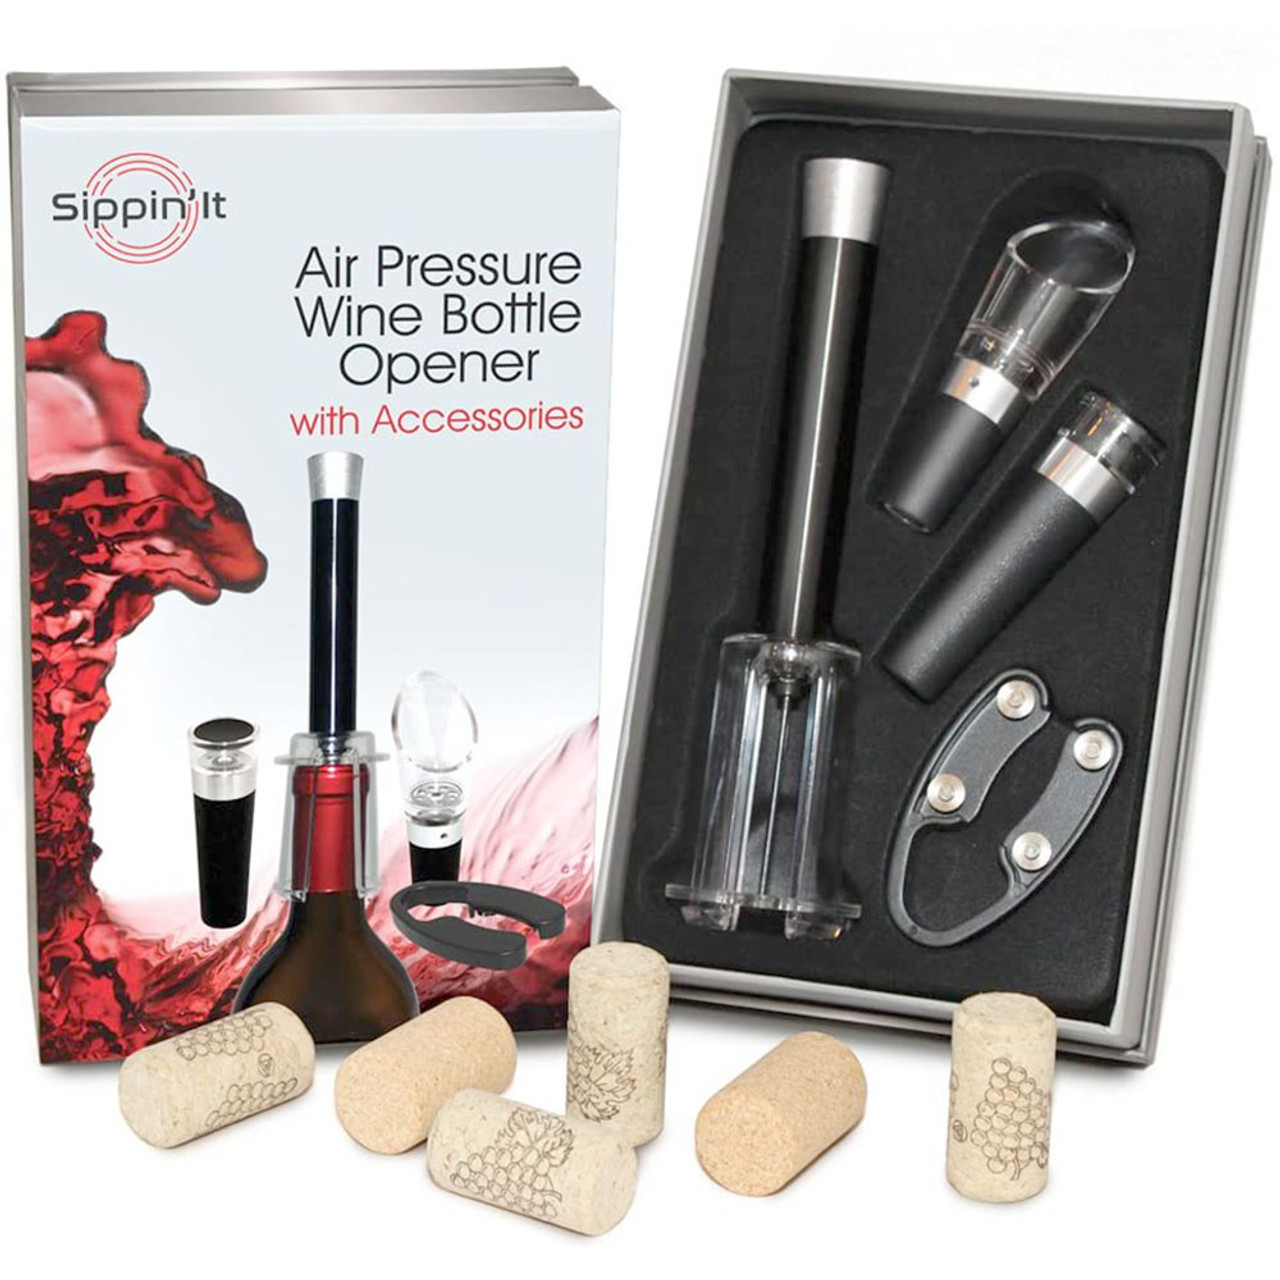 Sippin' It Air Pressure Wine Bottle Opener with Accessories product image